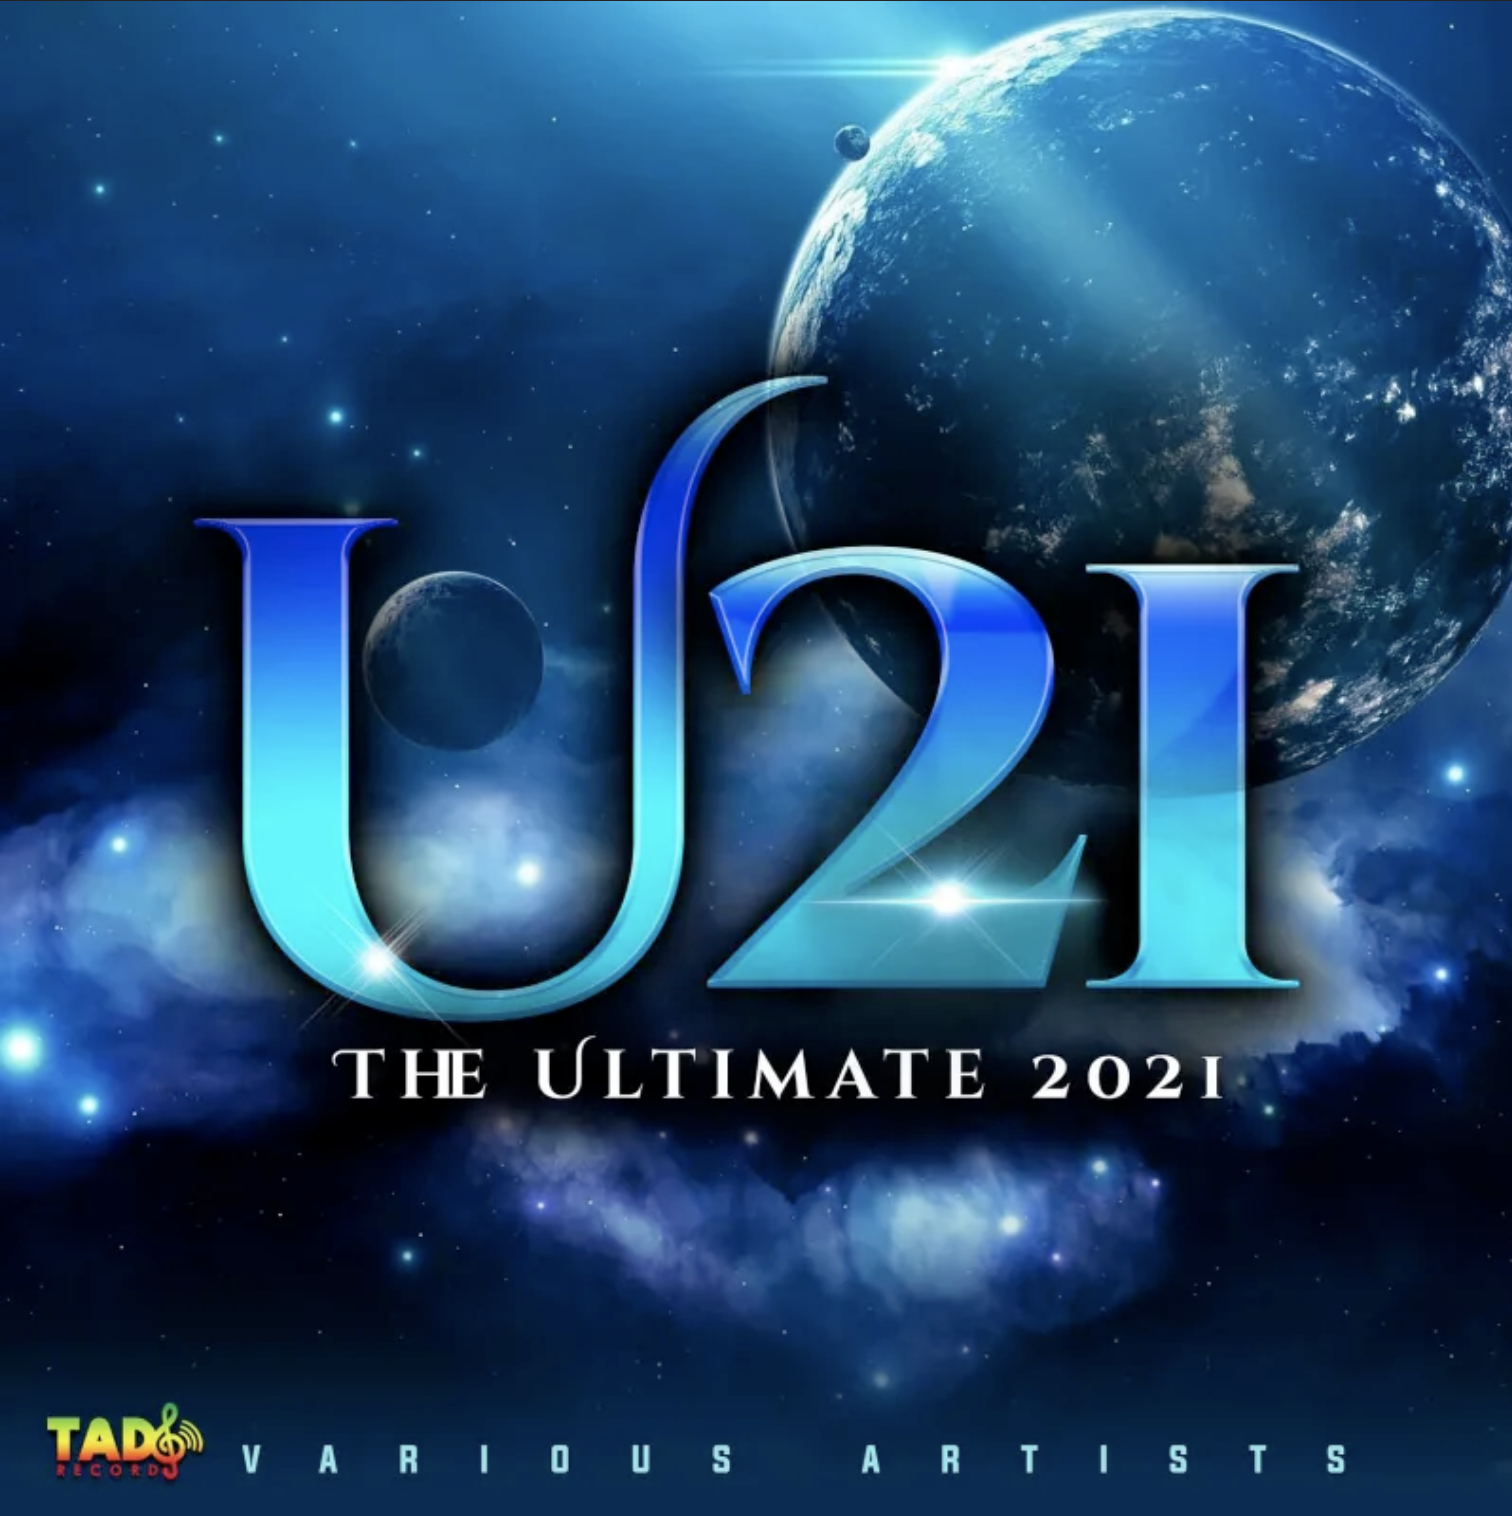 Tad’s Record Releases The Much-Anticipated Ultimate 2021 Album